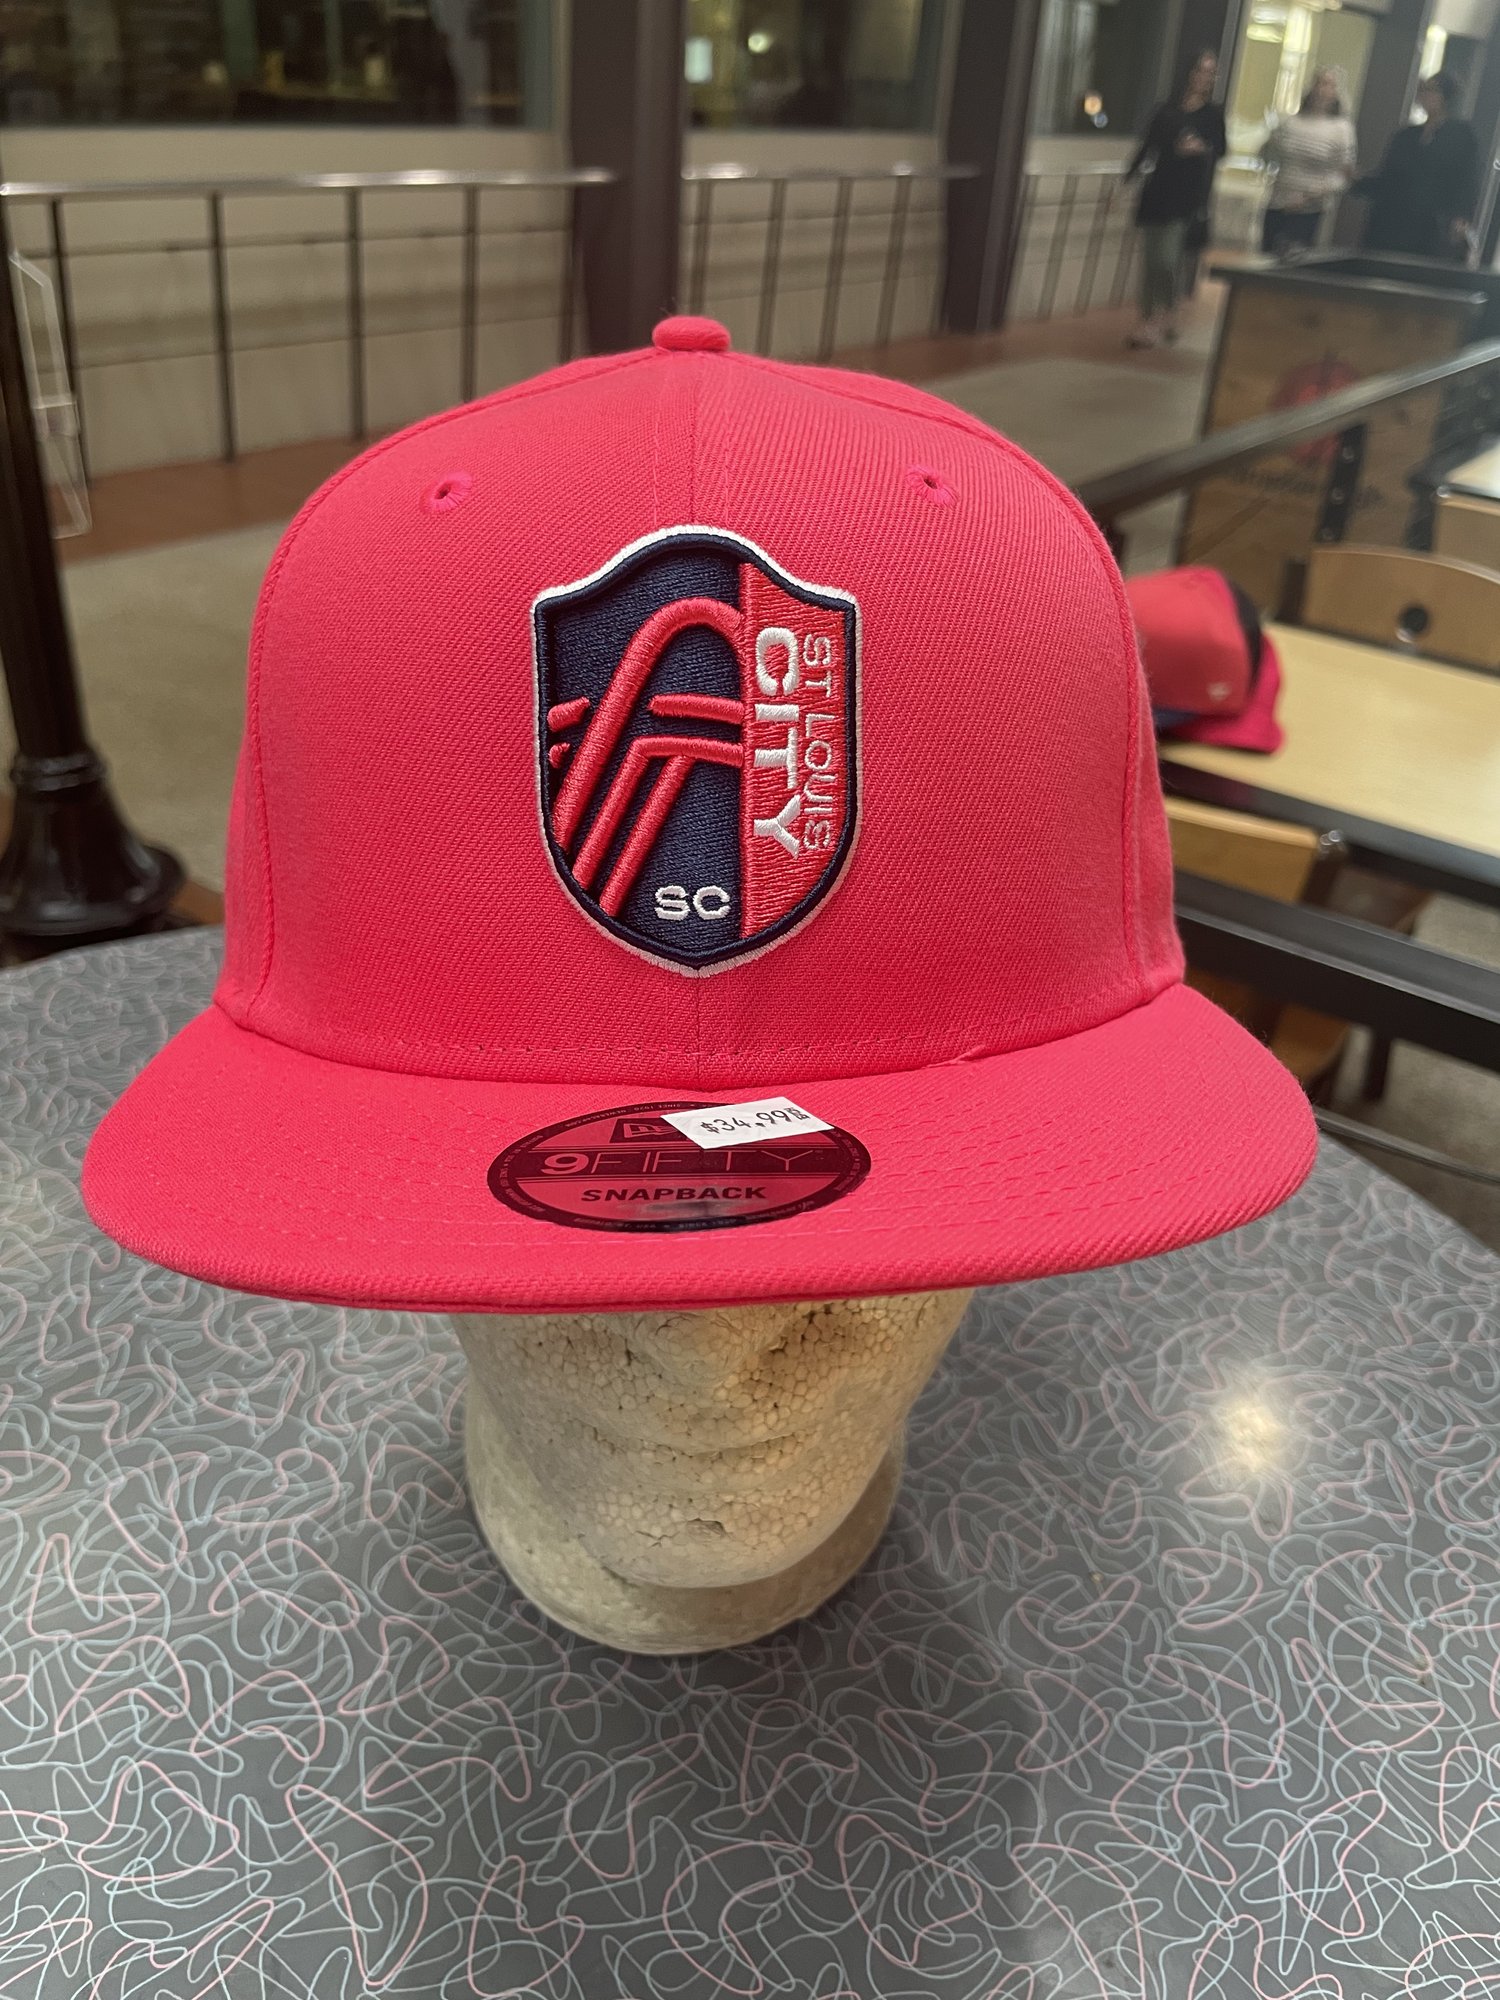 St Louis City SC adjustable ballcap redgenta with city flag sidepatch